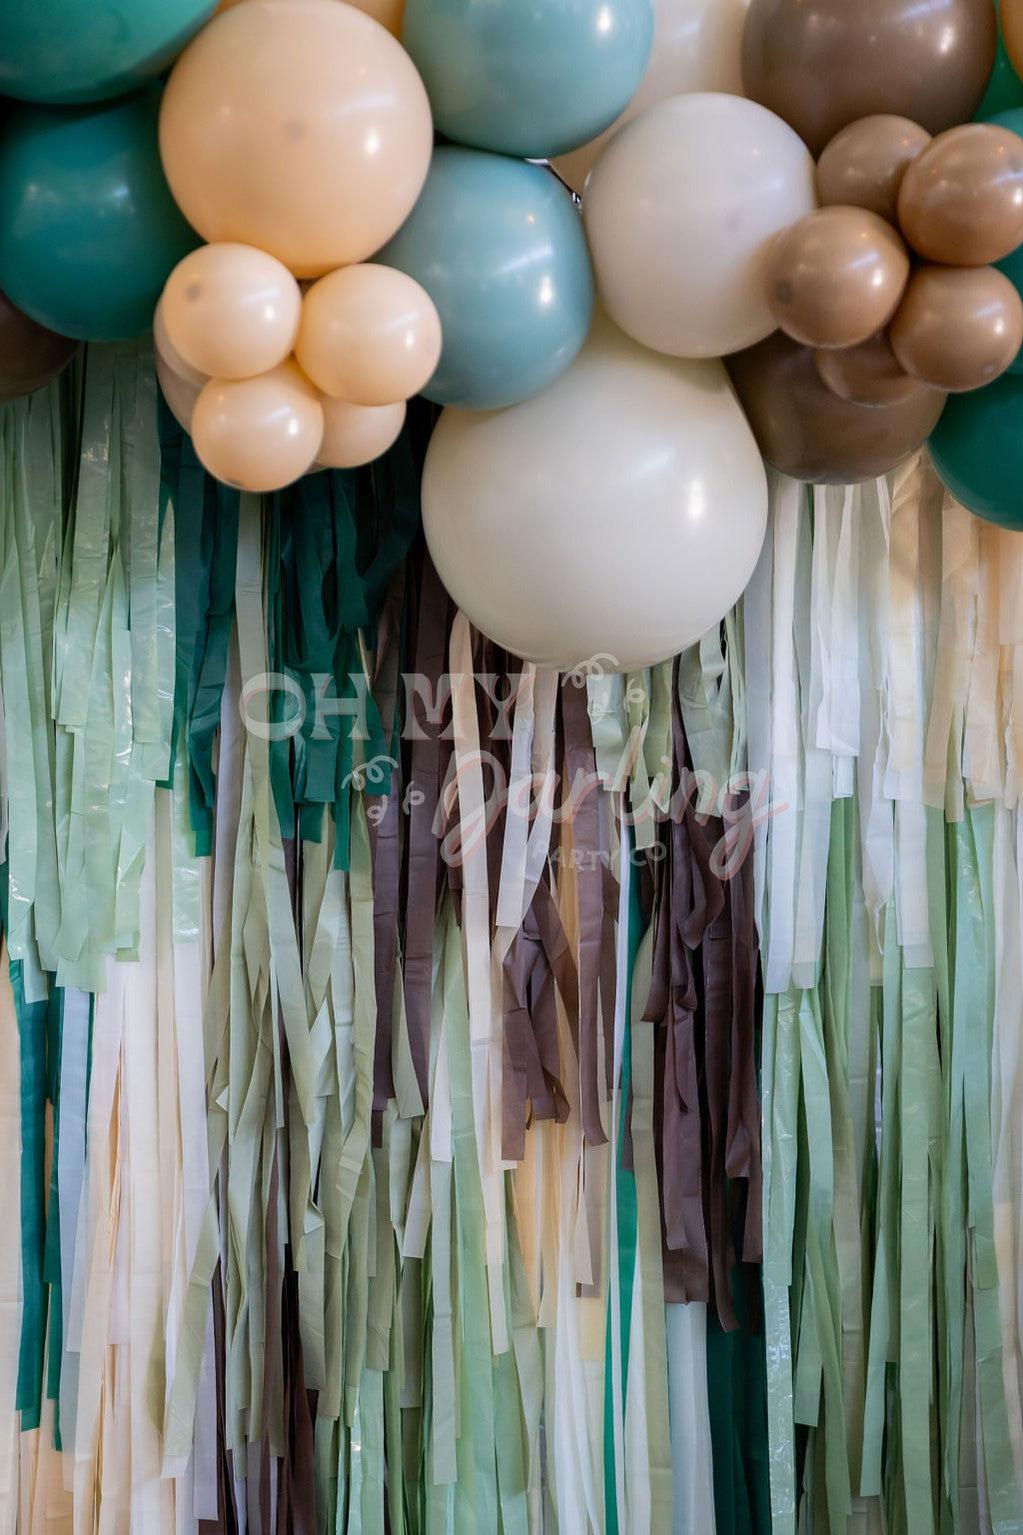 Ready to Ship: Happy Camper Backdrop-Fringe Backdrop-Party Decor-Oh My Darling Party Co-Oh My Darling Party Co-baby, baby in bloom, baby shower, backdrops for party, balloon garlands, birthday boy, birthday decorations, birthday girl, Birthday Party, boy baby shower, boy birthday, camp bachelorette, camp bride, camp bride bachelorette, camper, Campfire Cocktails, camping party, fringe backdrop, fringe decor, fringe garland, Fringe Streamers, gender neutral birthday, girl baby shower, girl birthday, happy bi